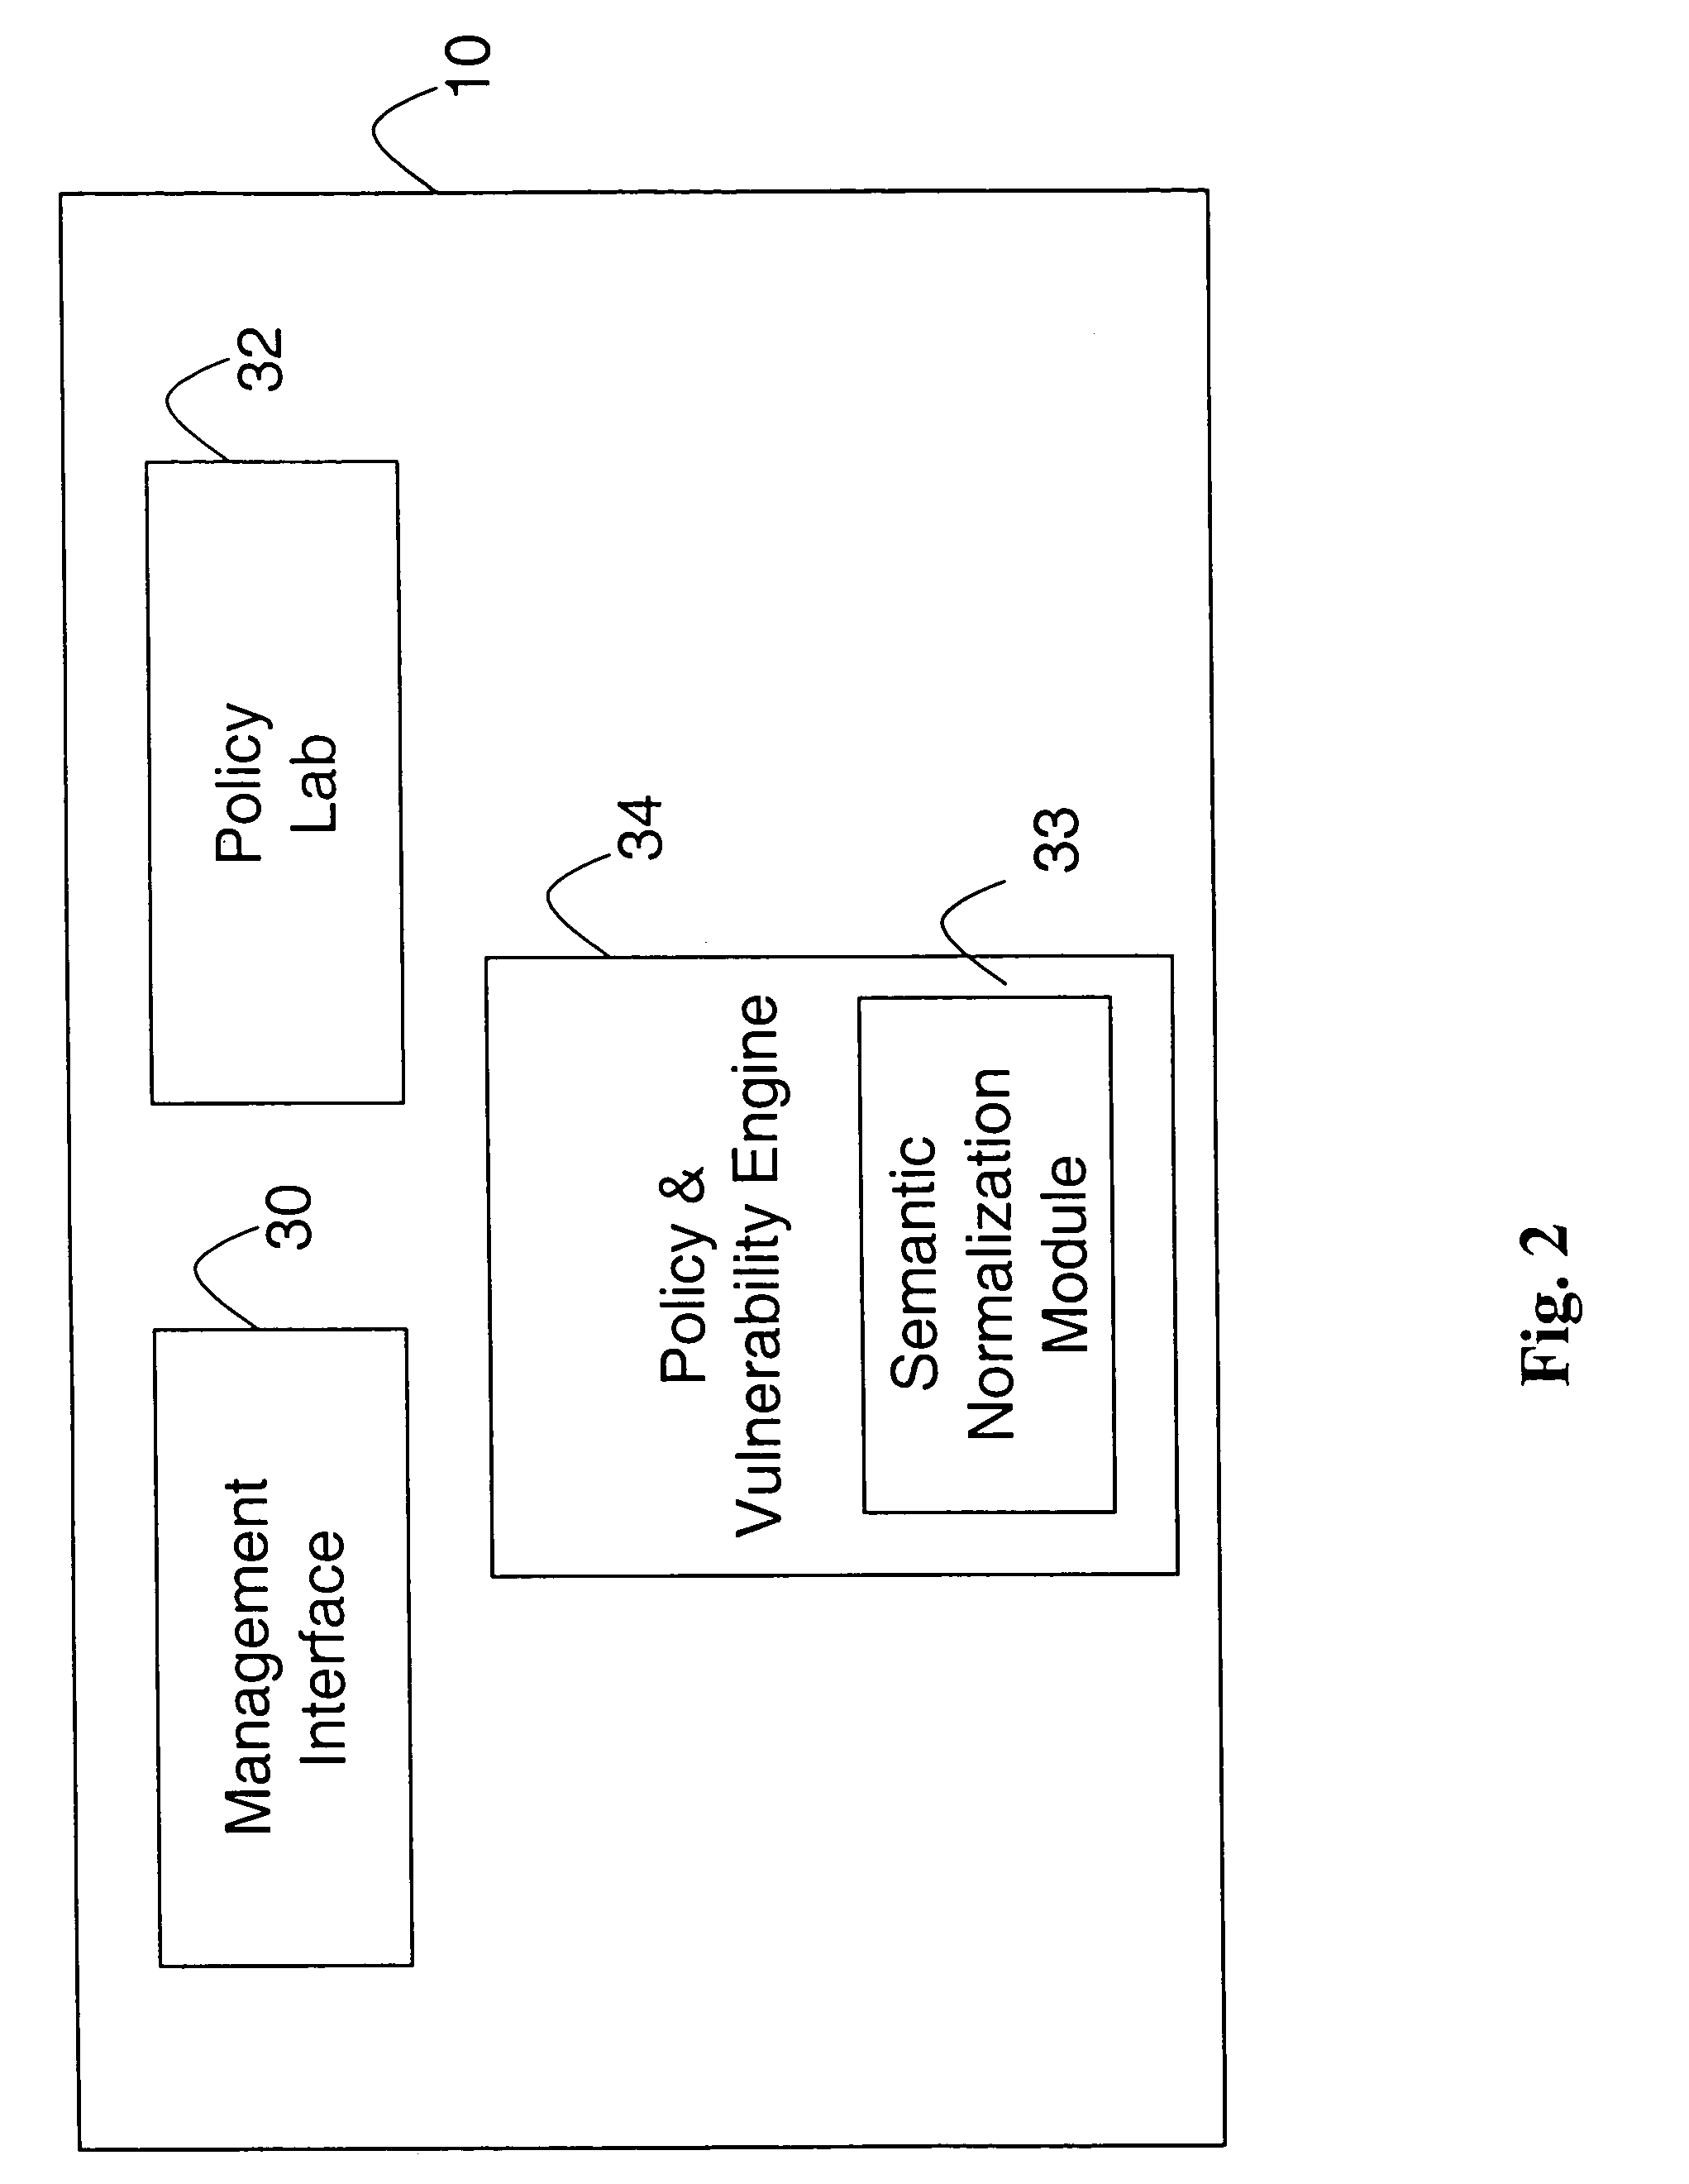 System and method for security information normalization